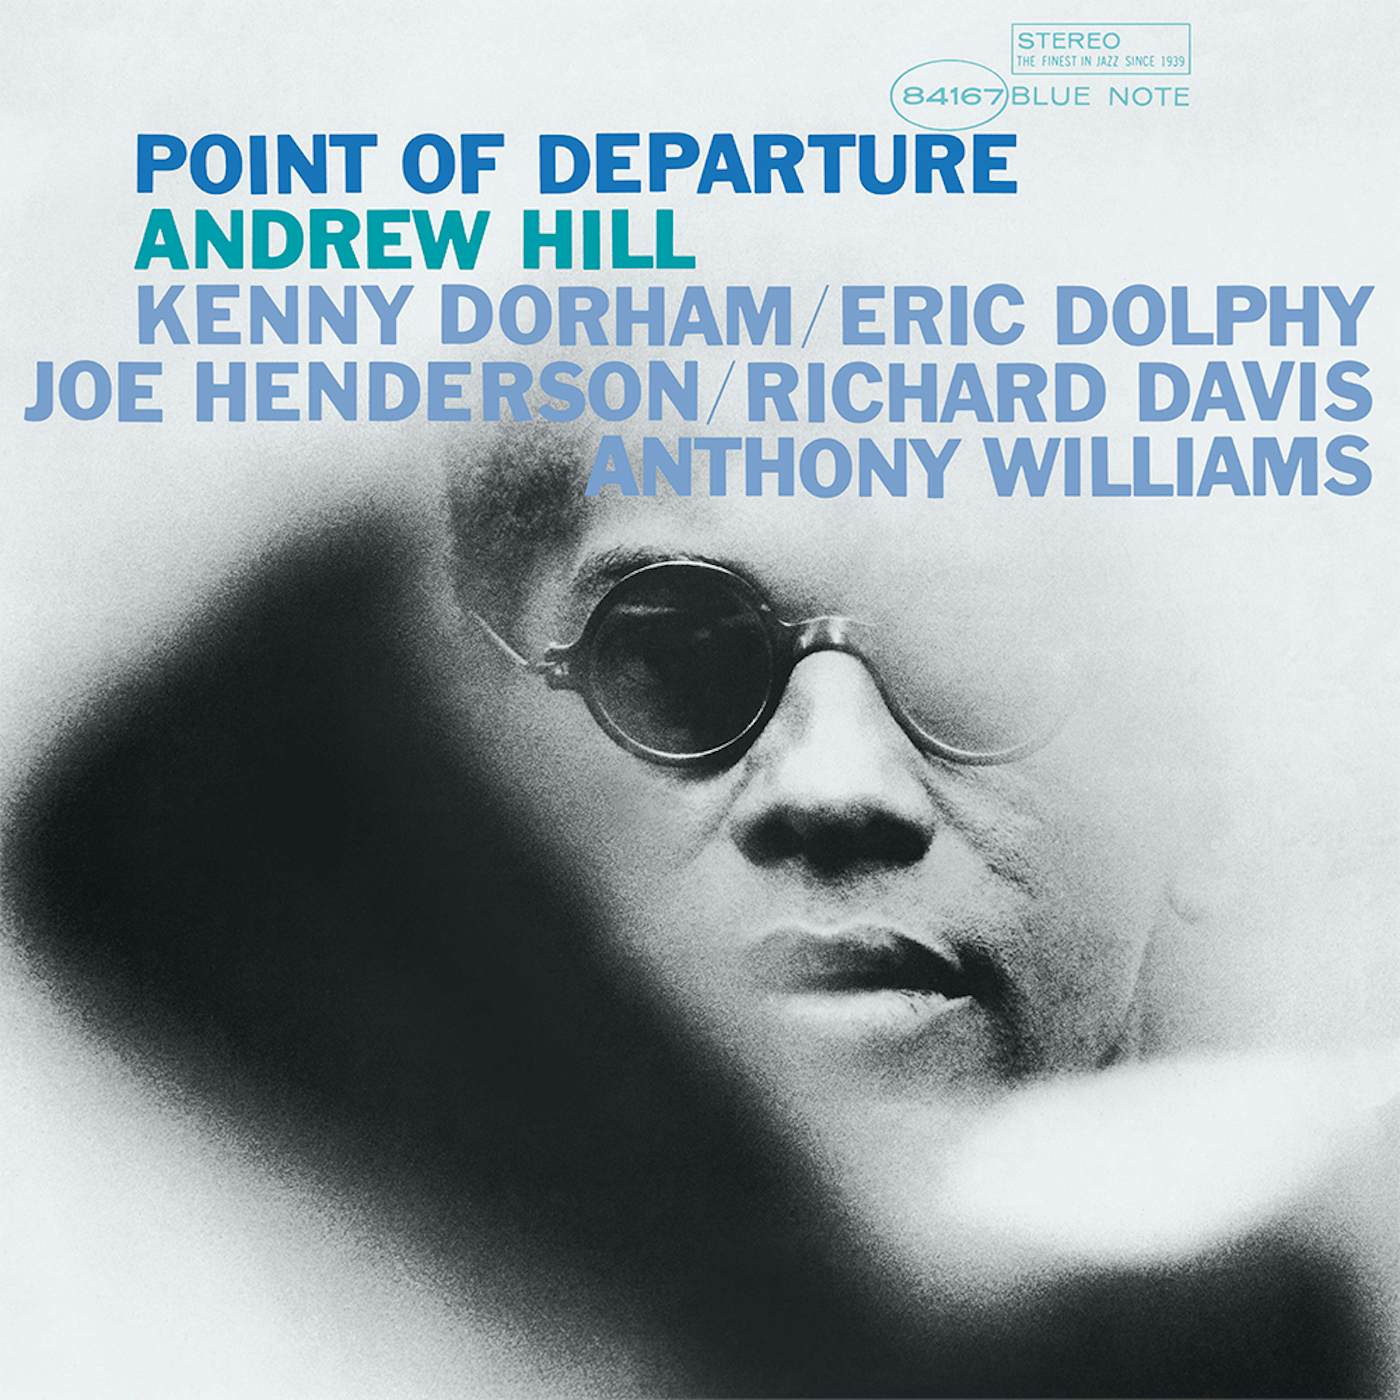 Andrew Hill - Point of Departure LP (Blue Note 75th Anniversary Reissue Series) (Vinyl)